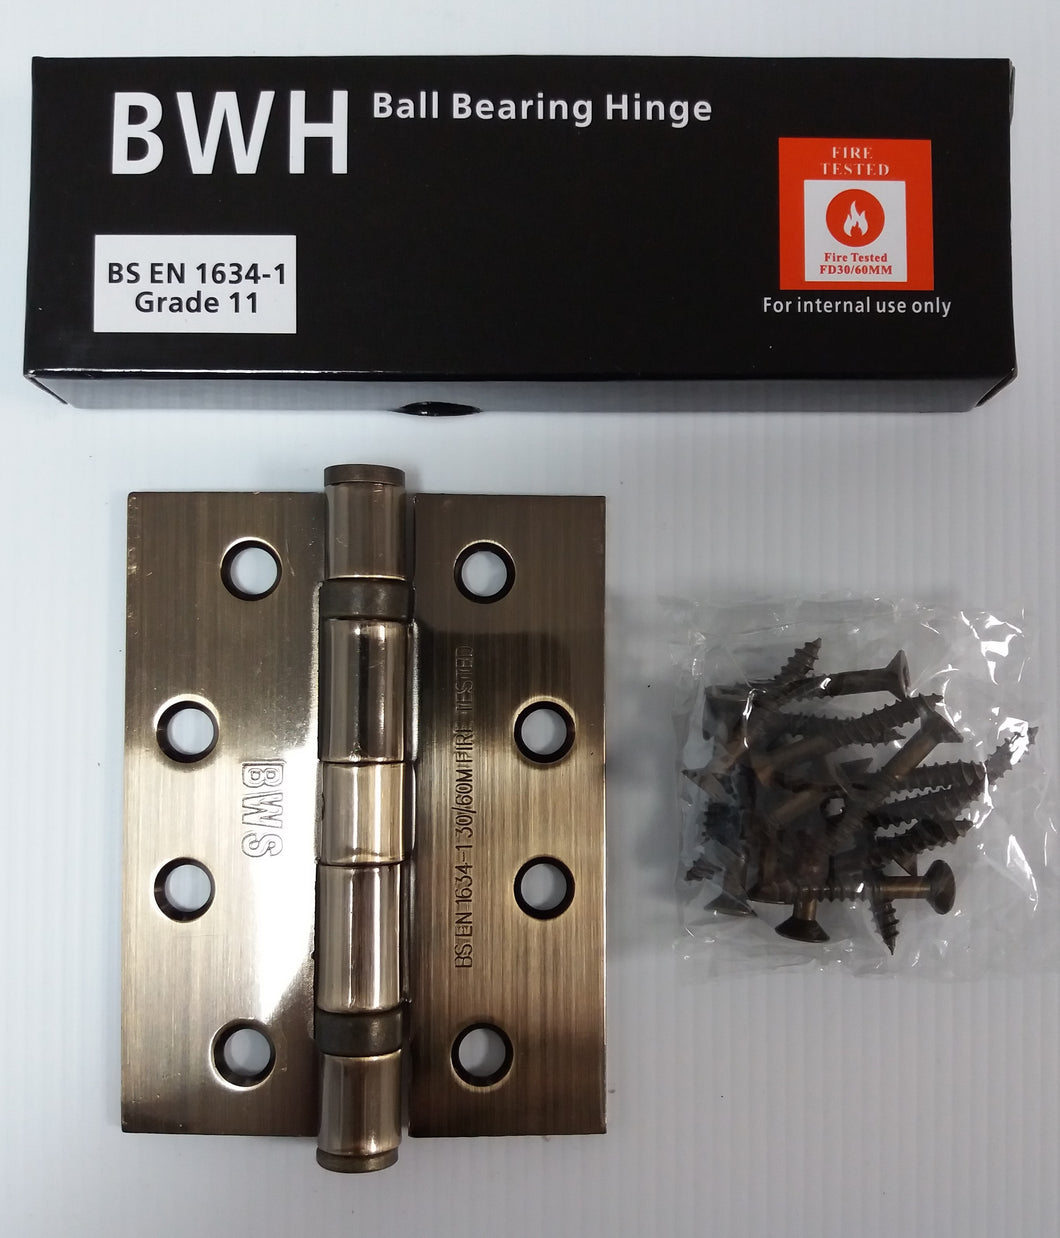 BWH 100MM BRONZE BALL BEARING HINGE GRADE 11 STEEL 1HR FIRE RATED (3 PACK)